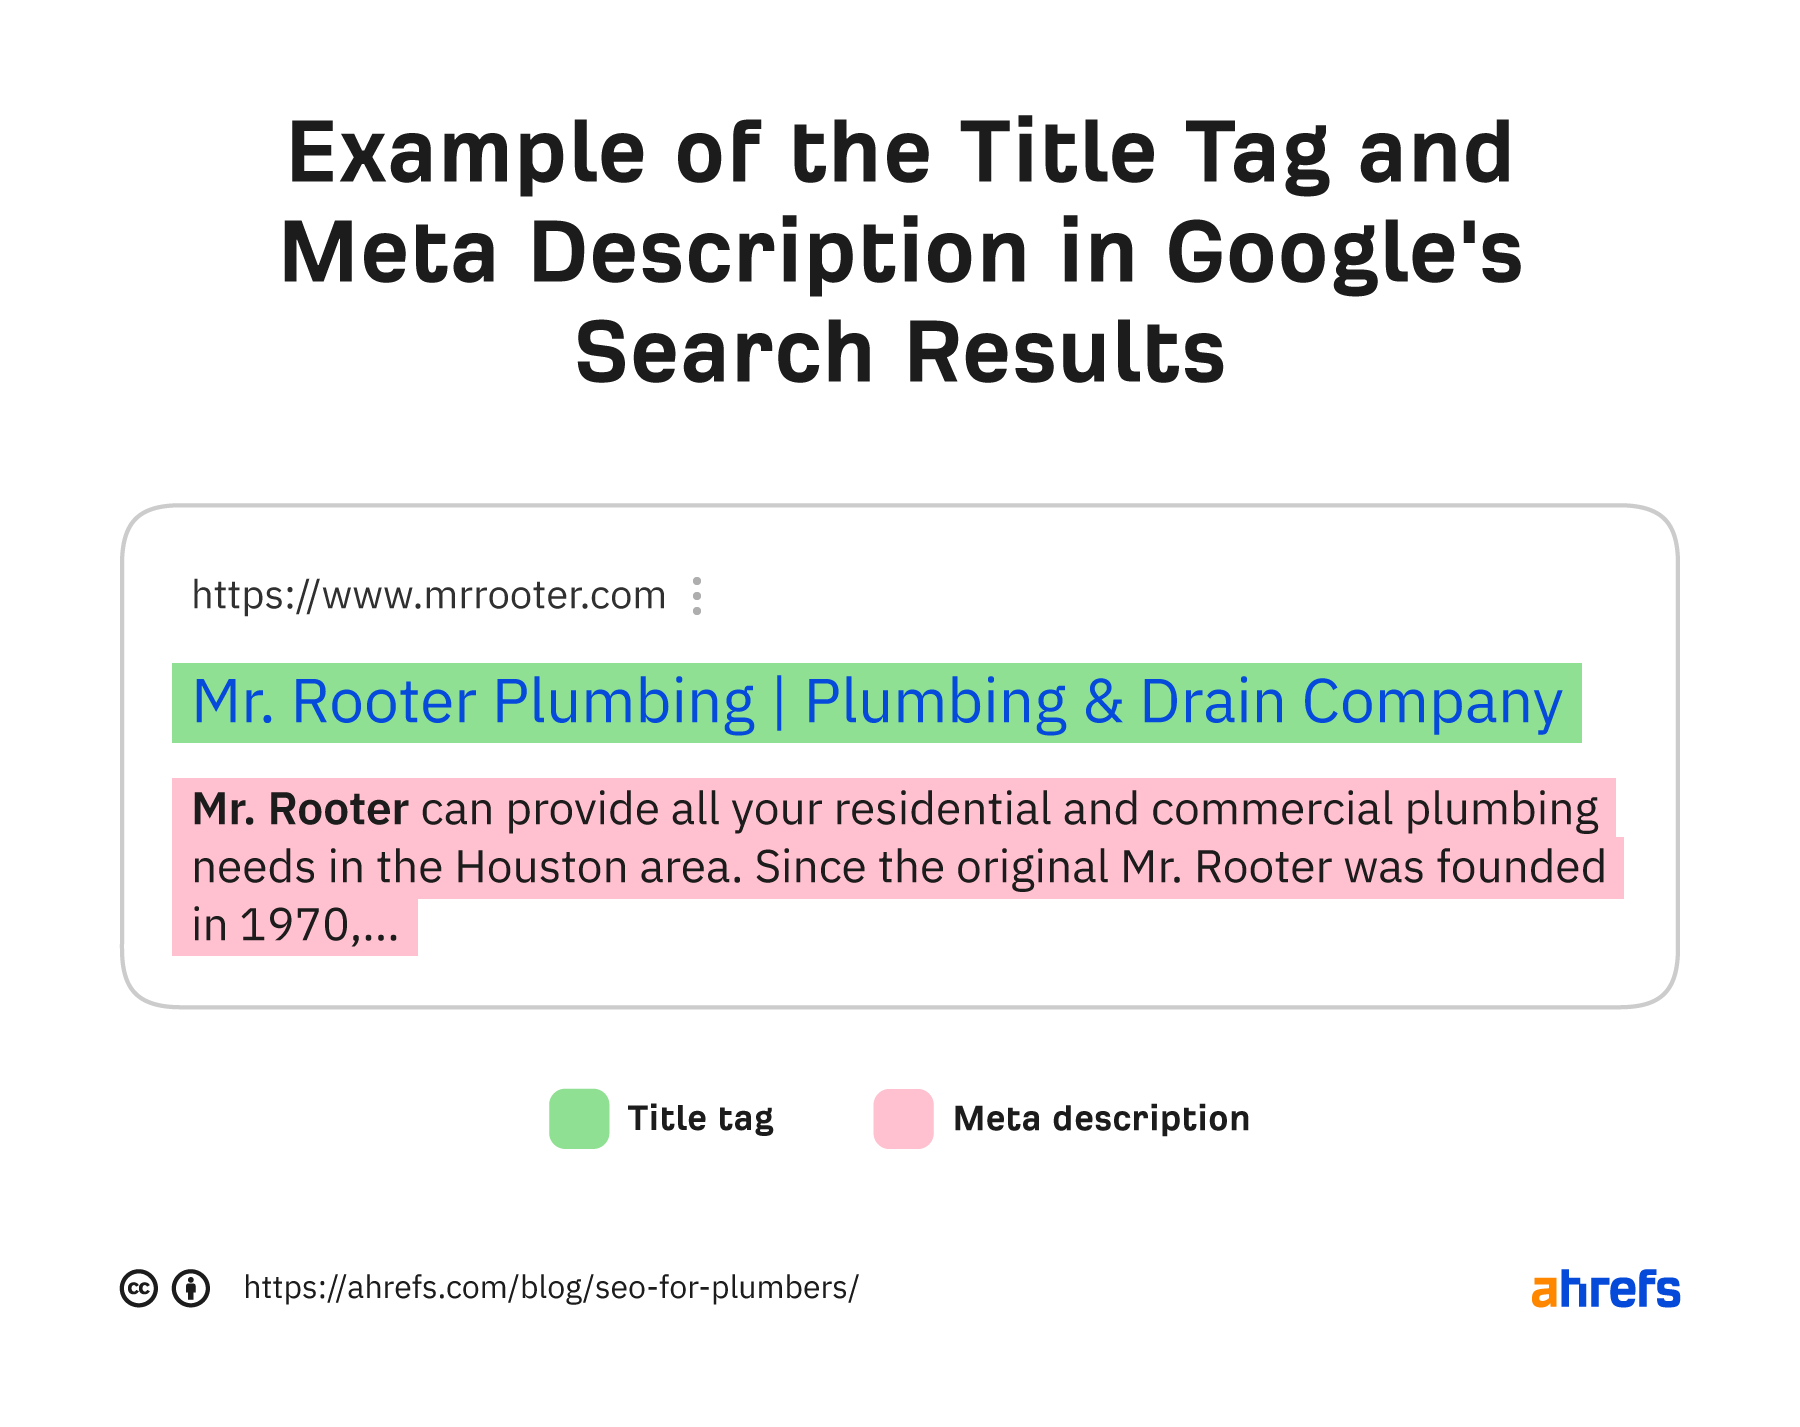 Example of the title tag and meta description in Google's search results
